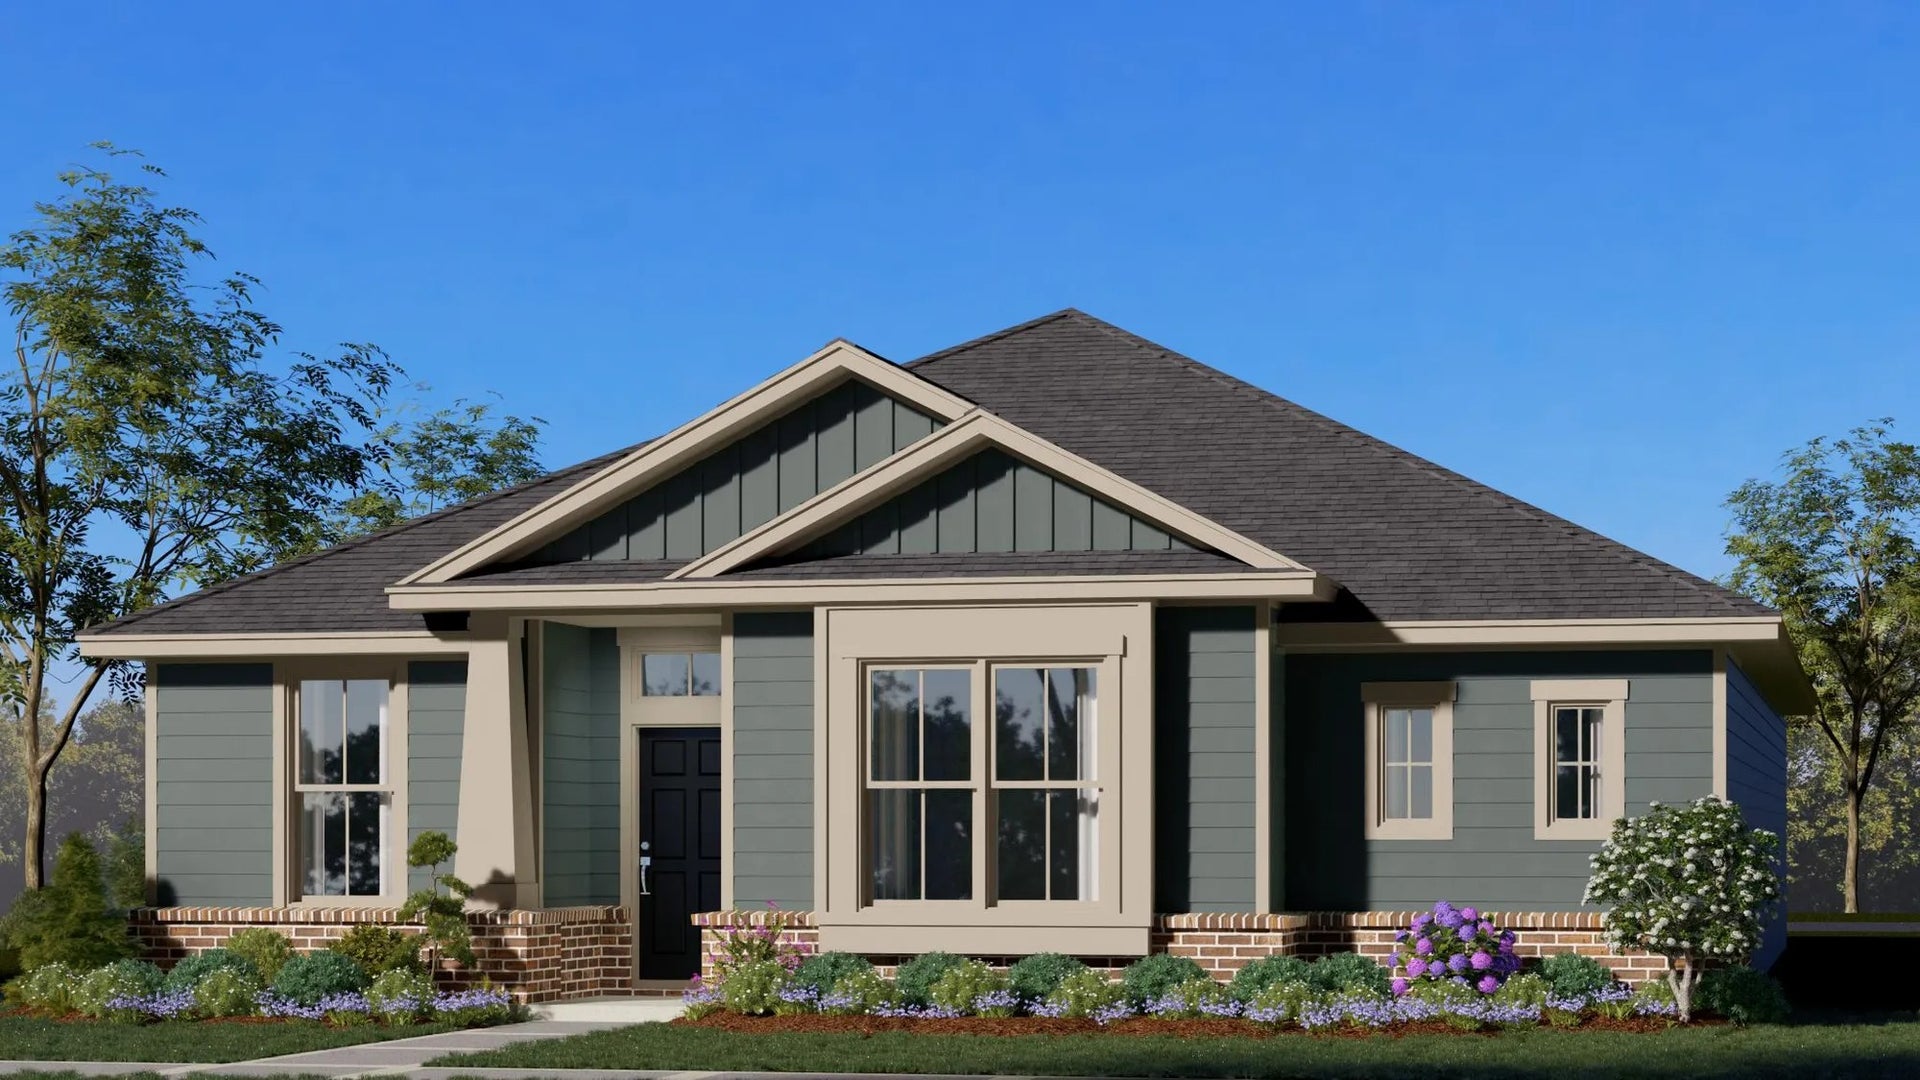 2086 C A. Concept 2086 Home with 4 Bedrooms